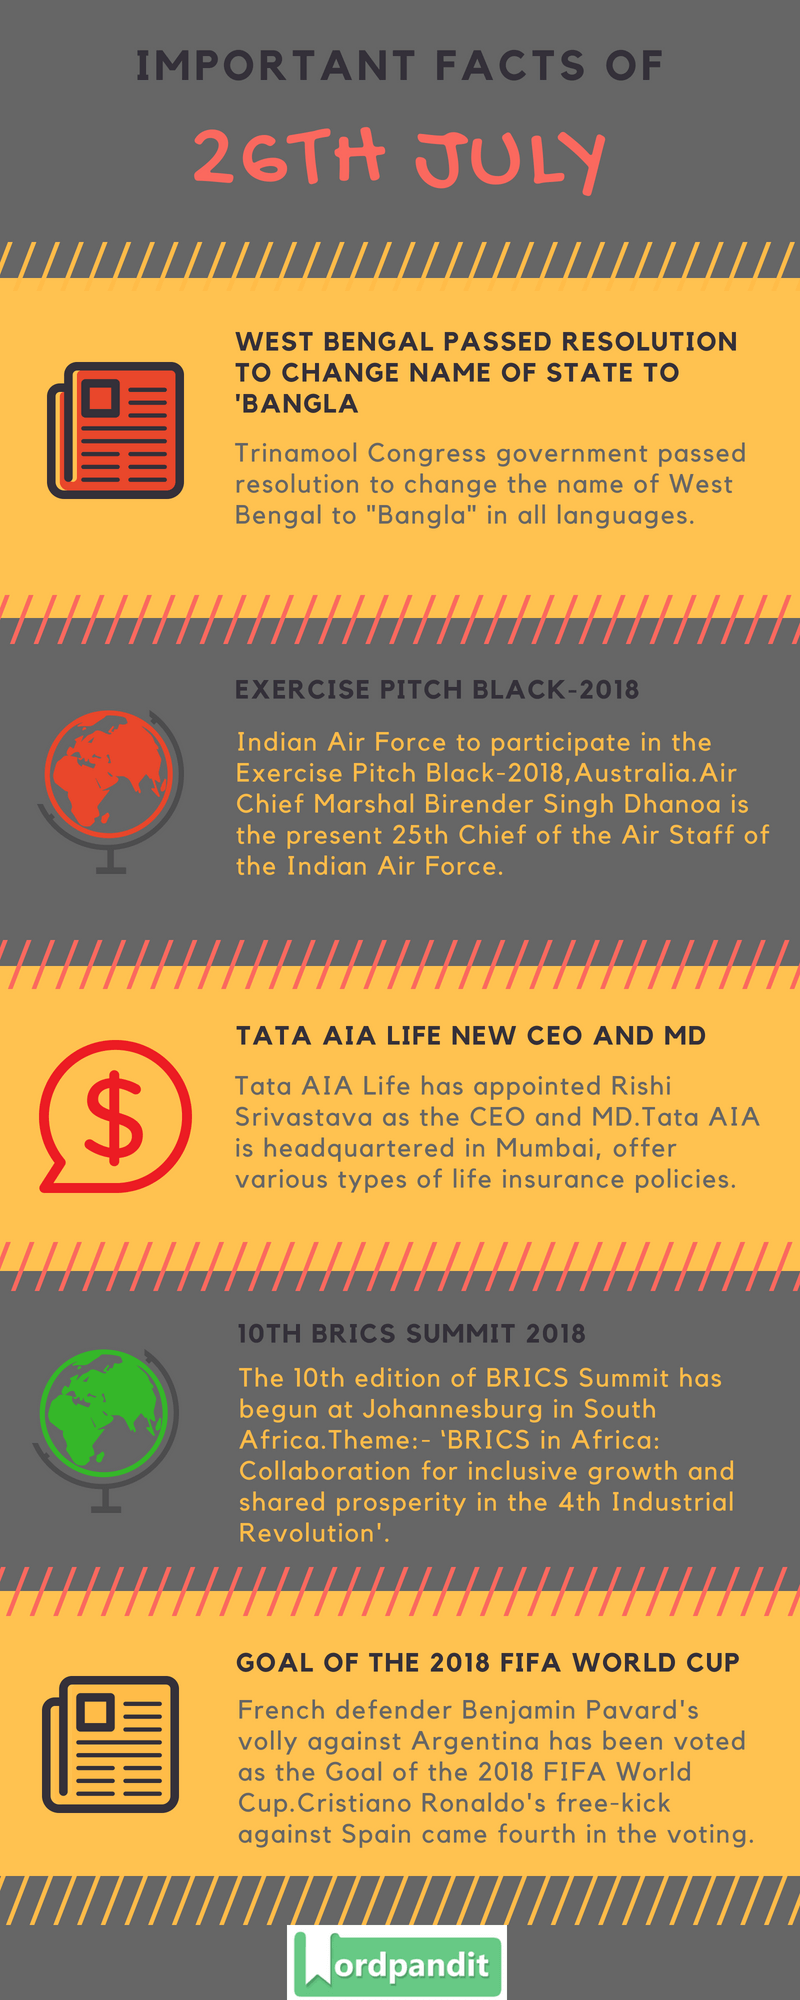 Daily Current Affairs 26 July 2018 Current Affairs Quiz July 26 2018 Current Affairs Infographic